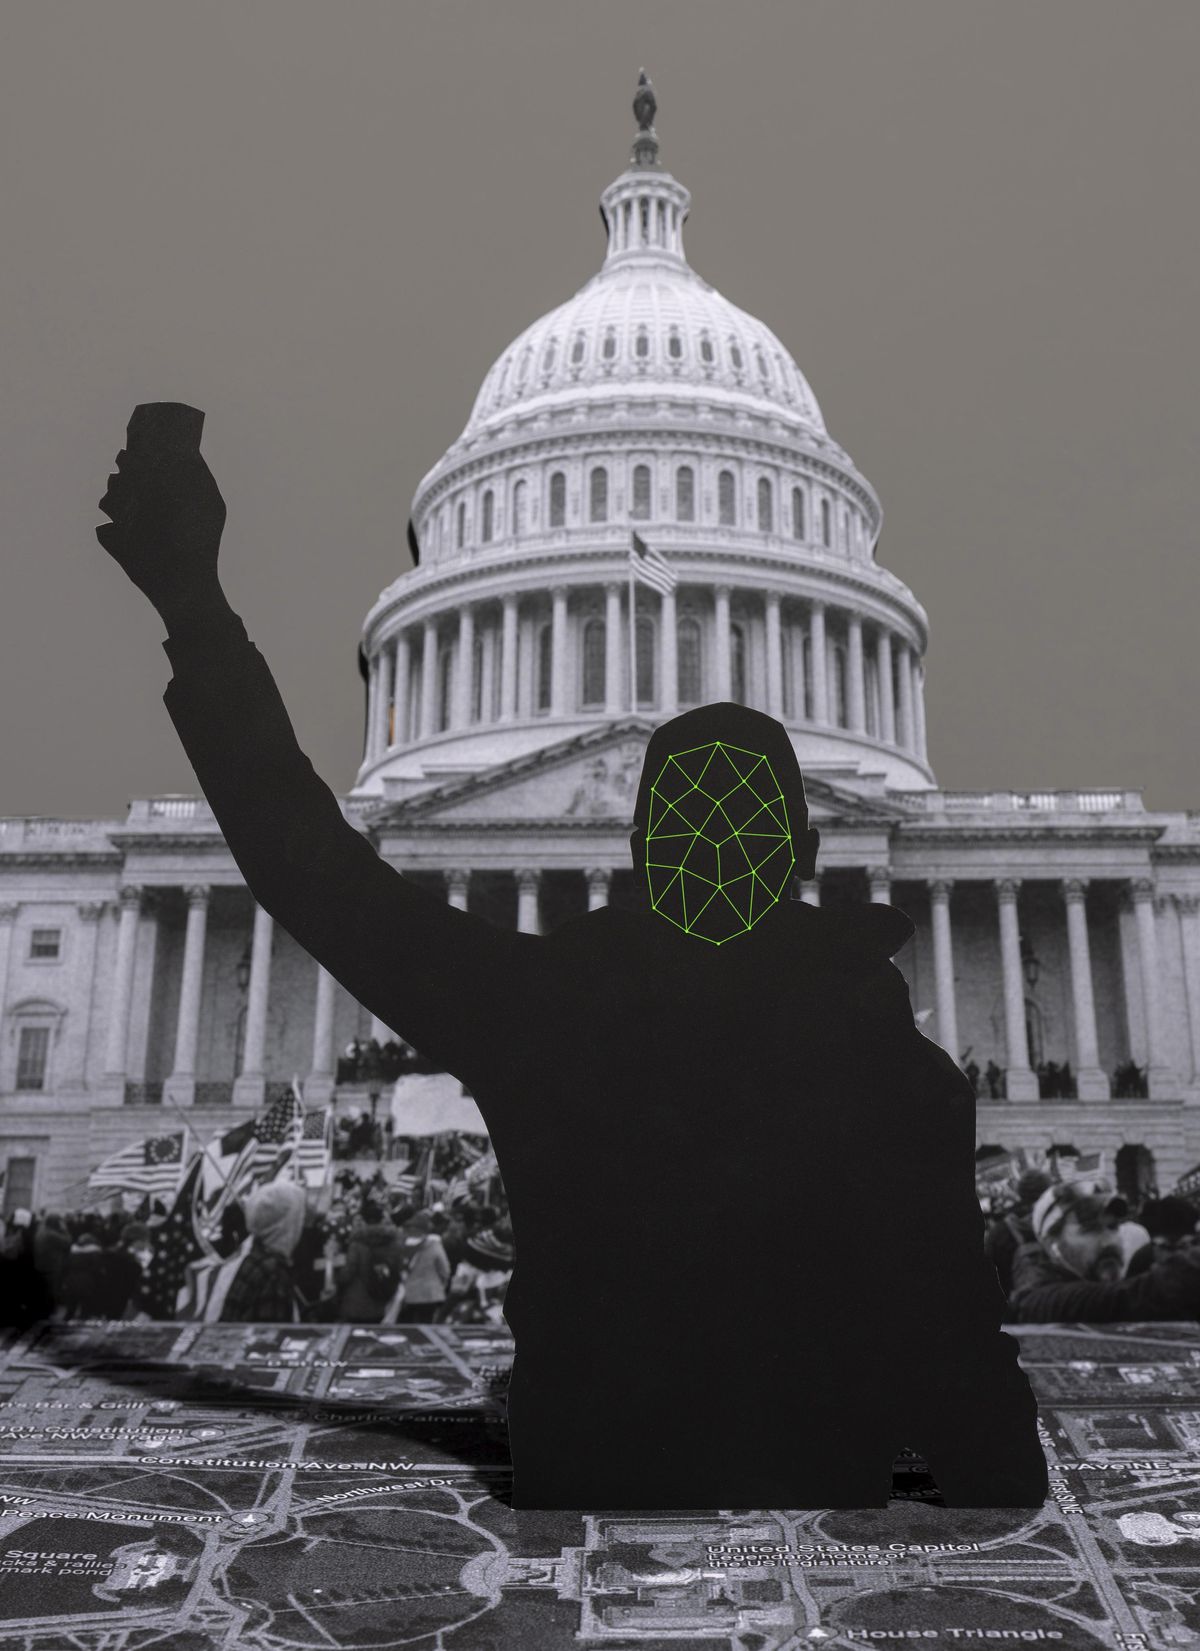 Illustration of the silhouette of a person with upraised arm holding a cellphone in front of the U.S. Capitol building. Superimposed on the head is a green matrix, which represents data points used for facial recognition 